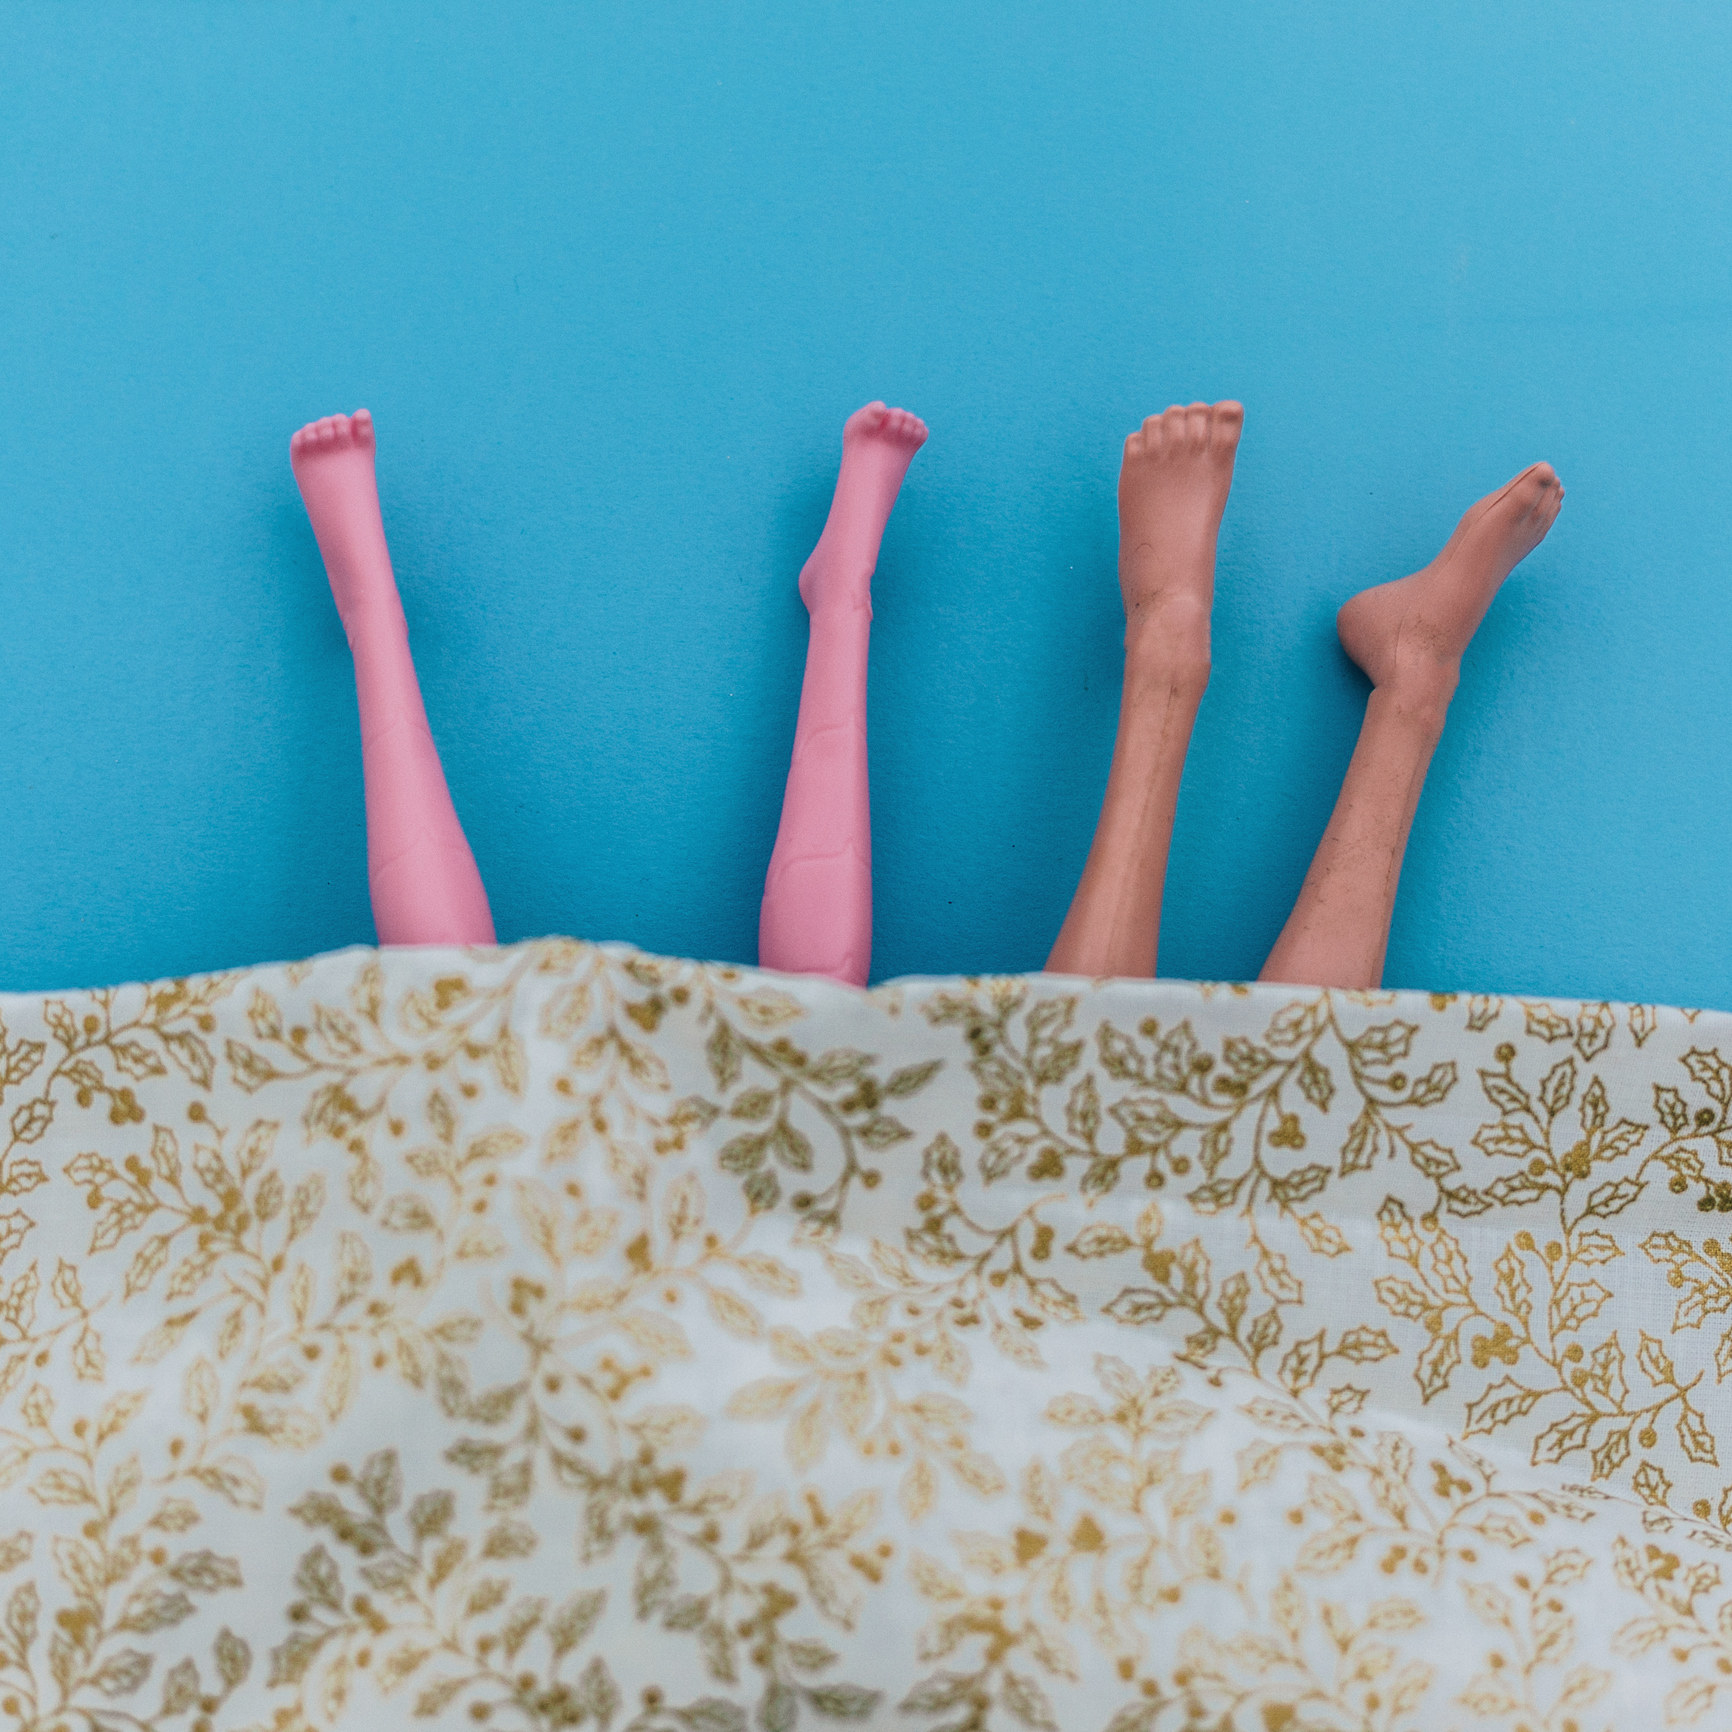 Stock image of barbie doll legs sticking out from under a blanket